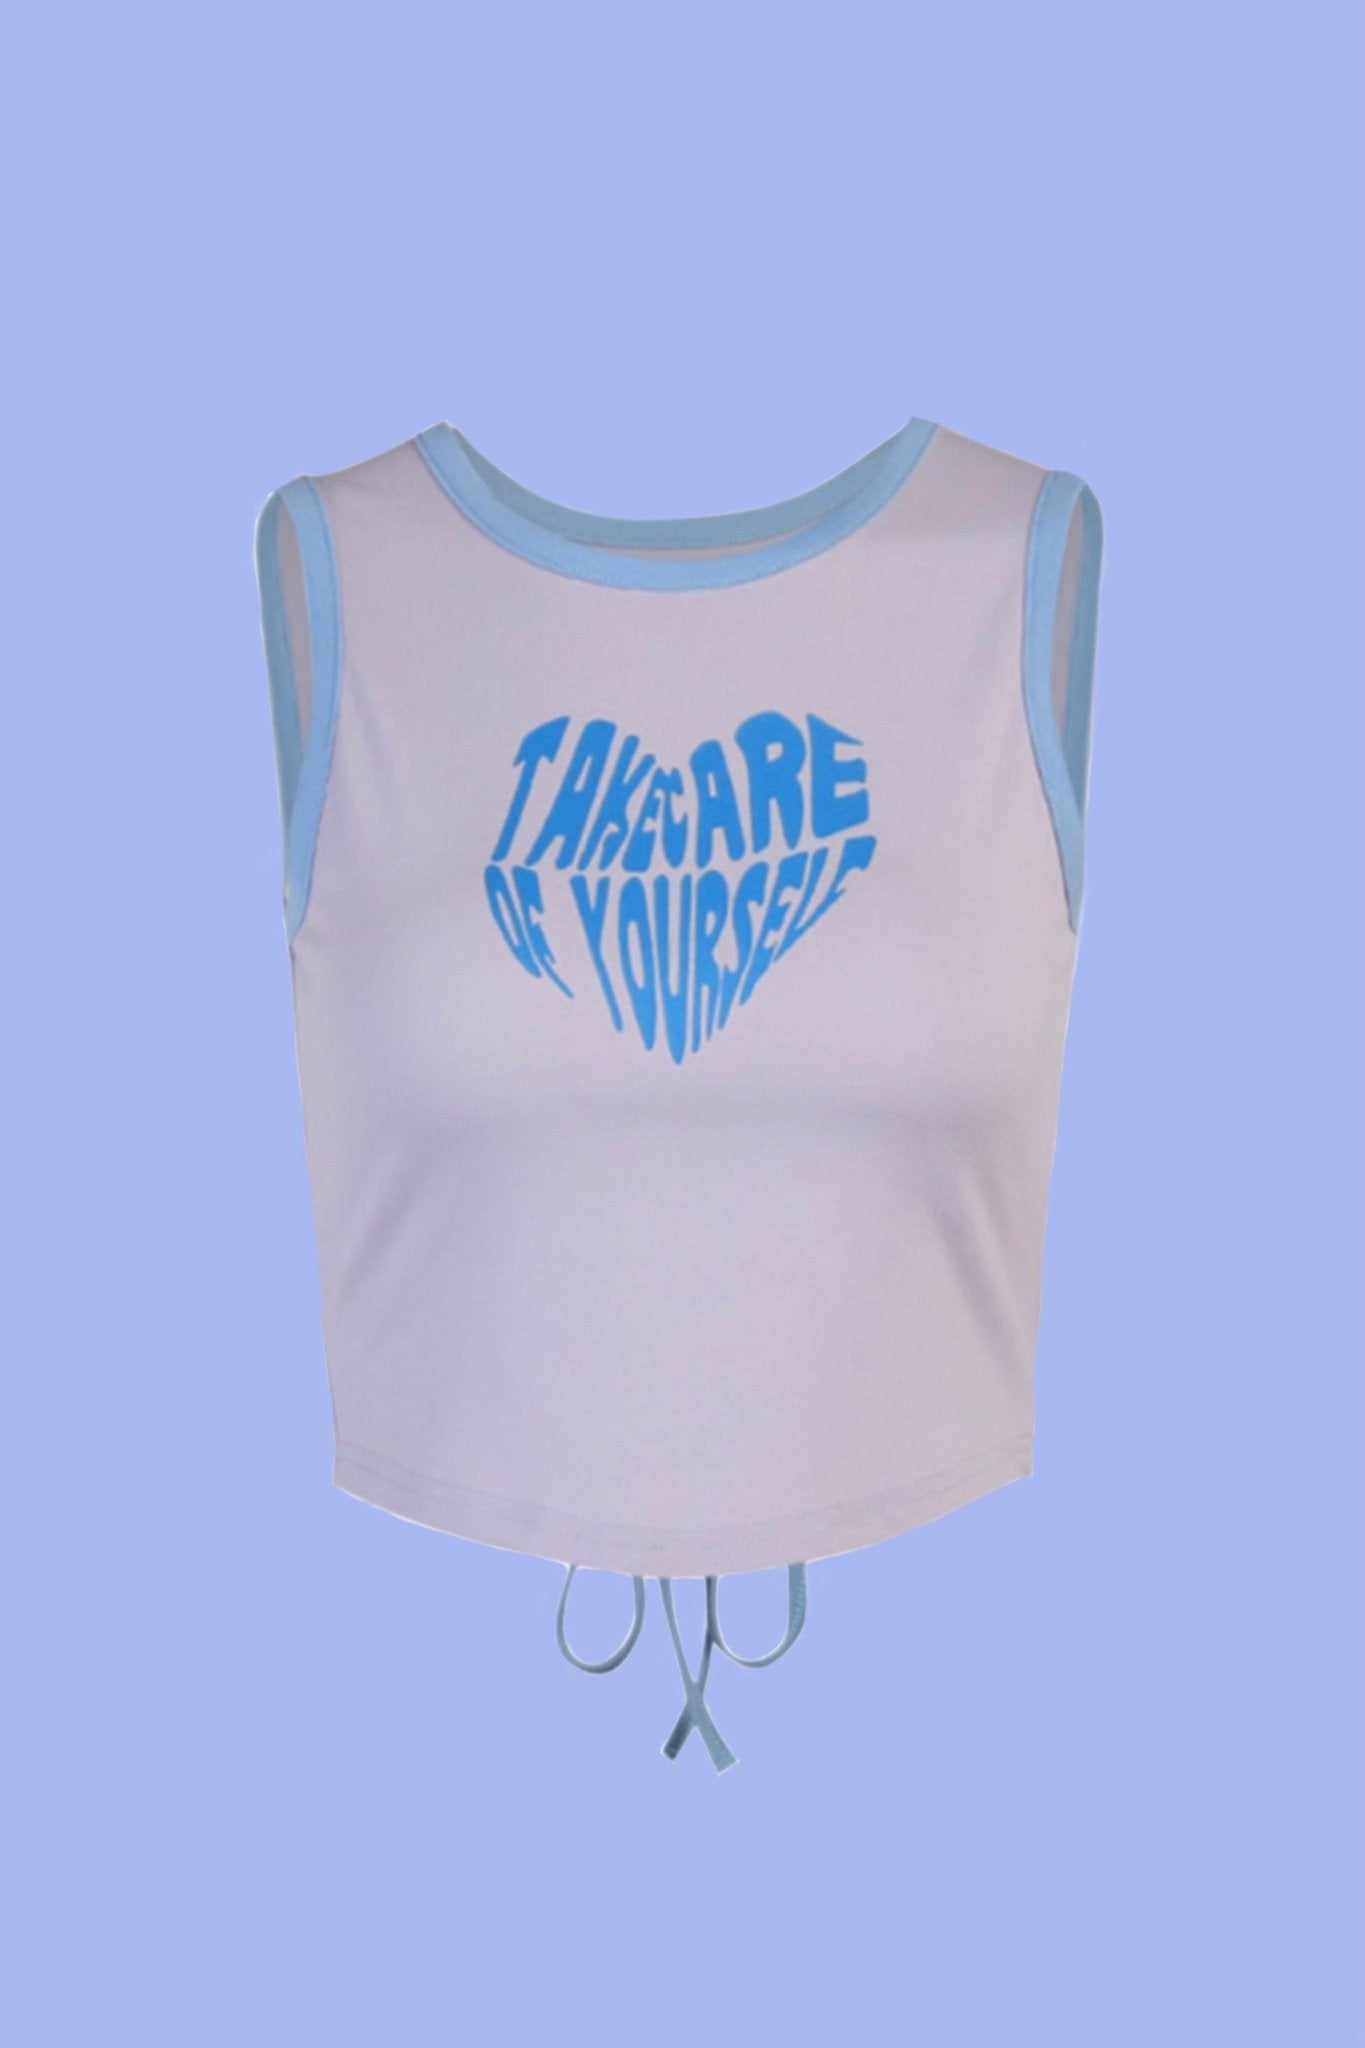 'Take care yourself' crop tank - SCG_COLLECTIONS